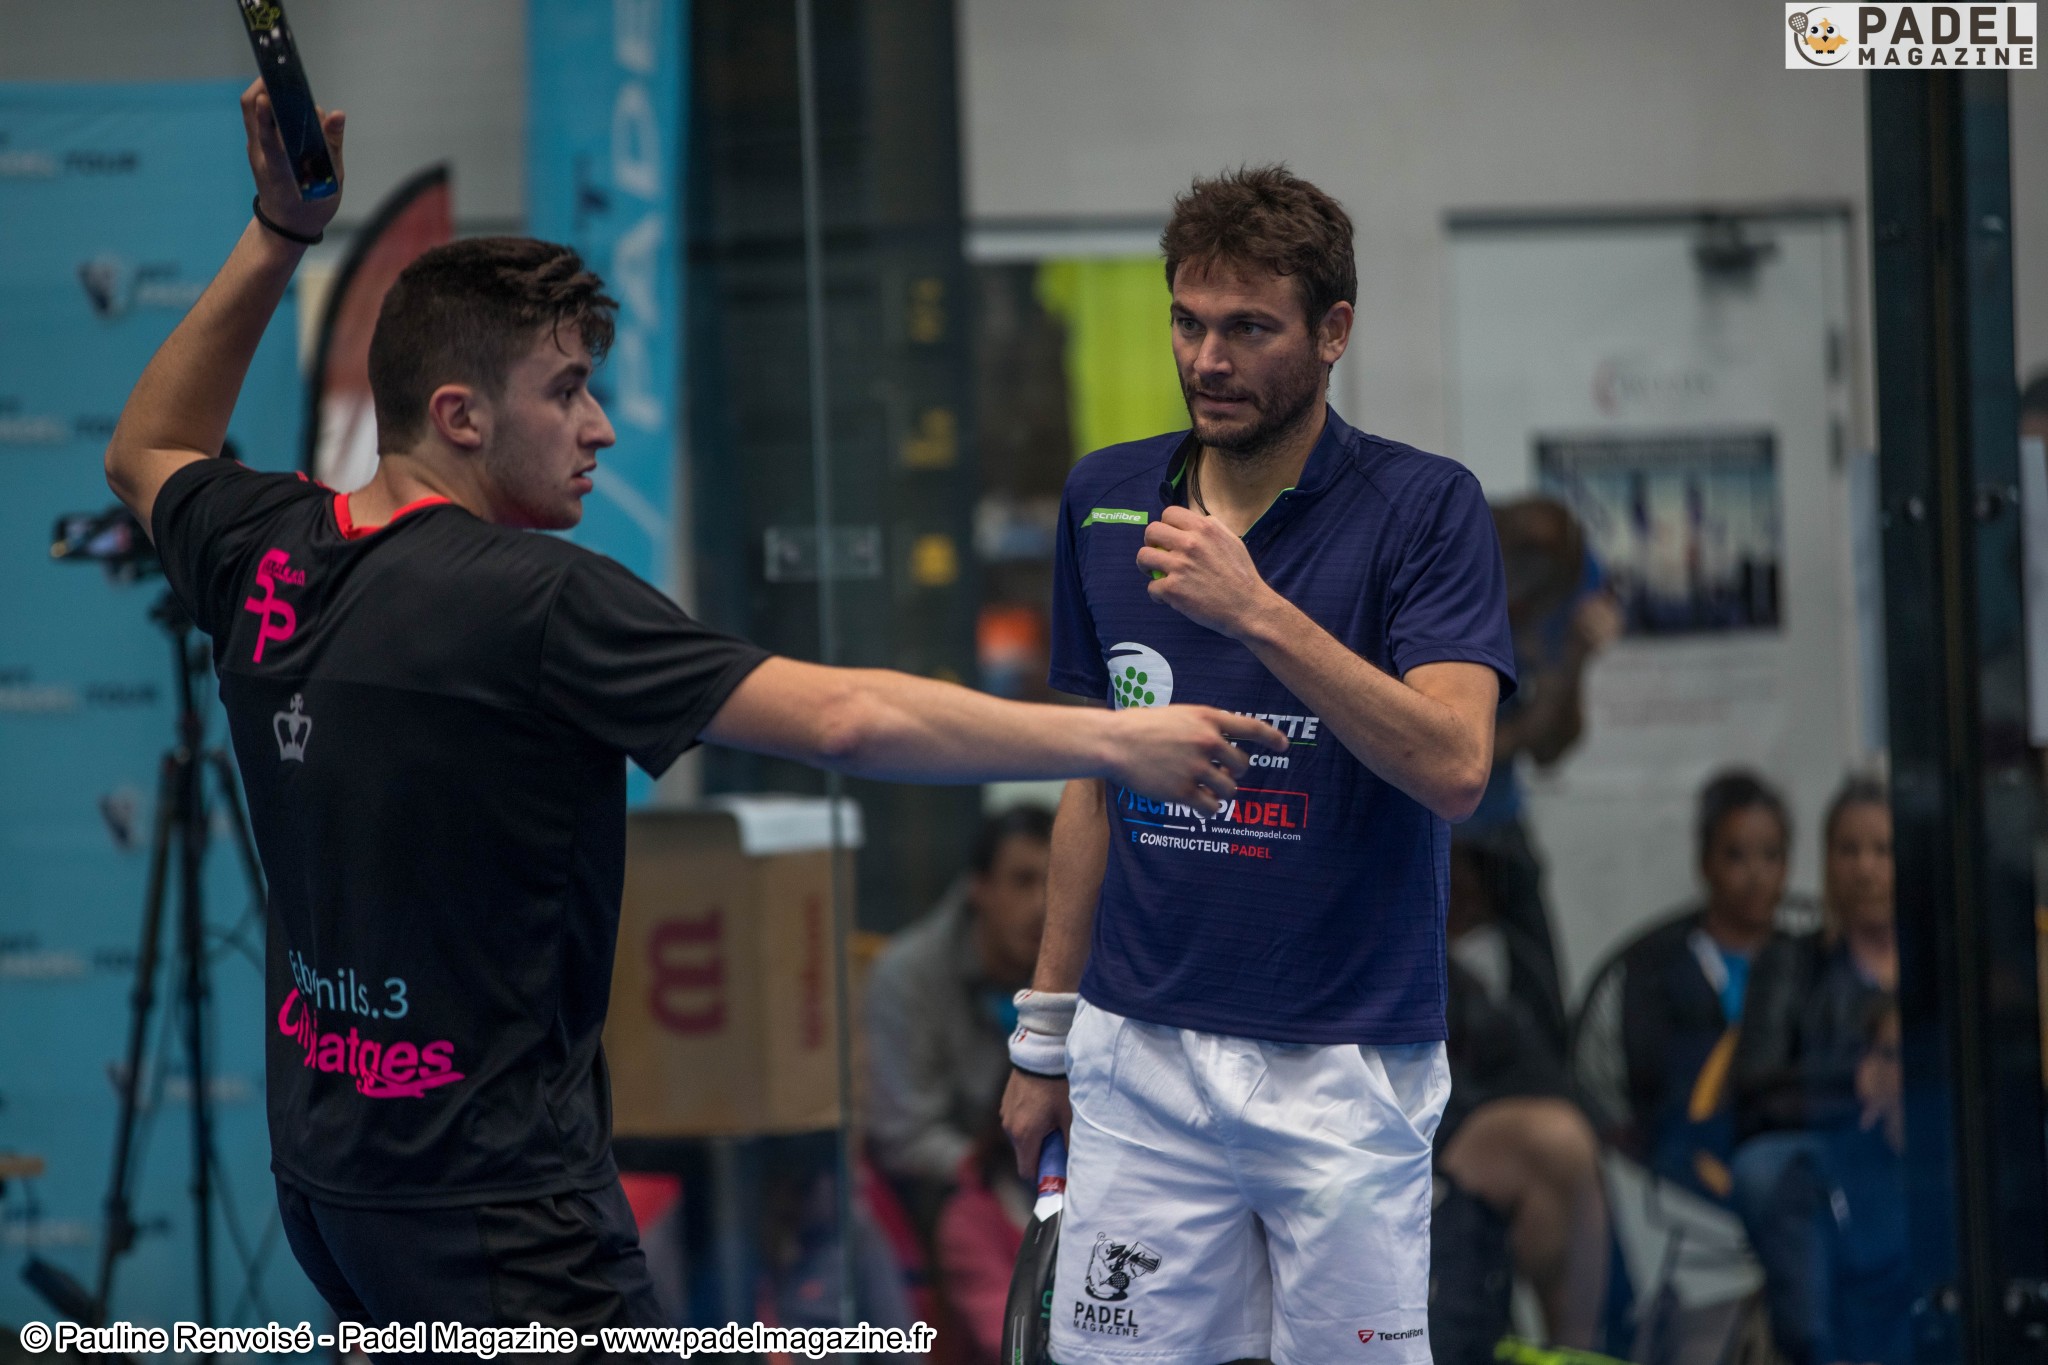 Scatena / Bernils joined Blanqué / Bergeron in the final of the FFT PADEL TOUR LYON